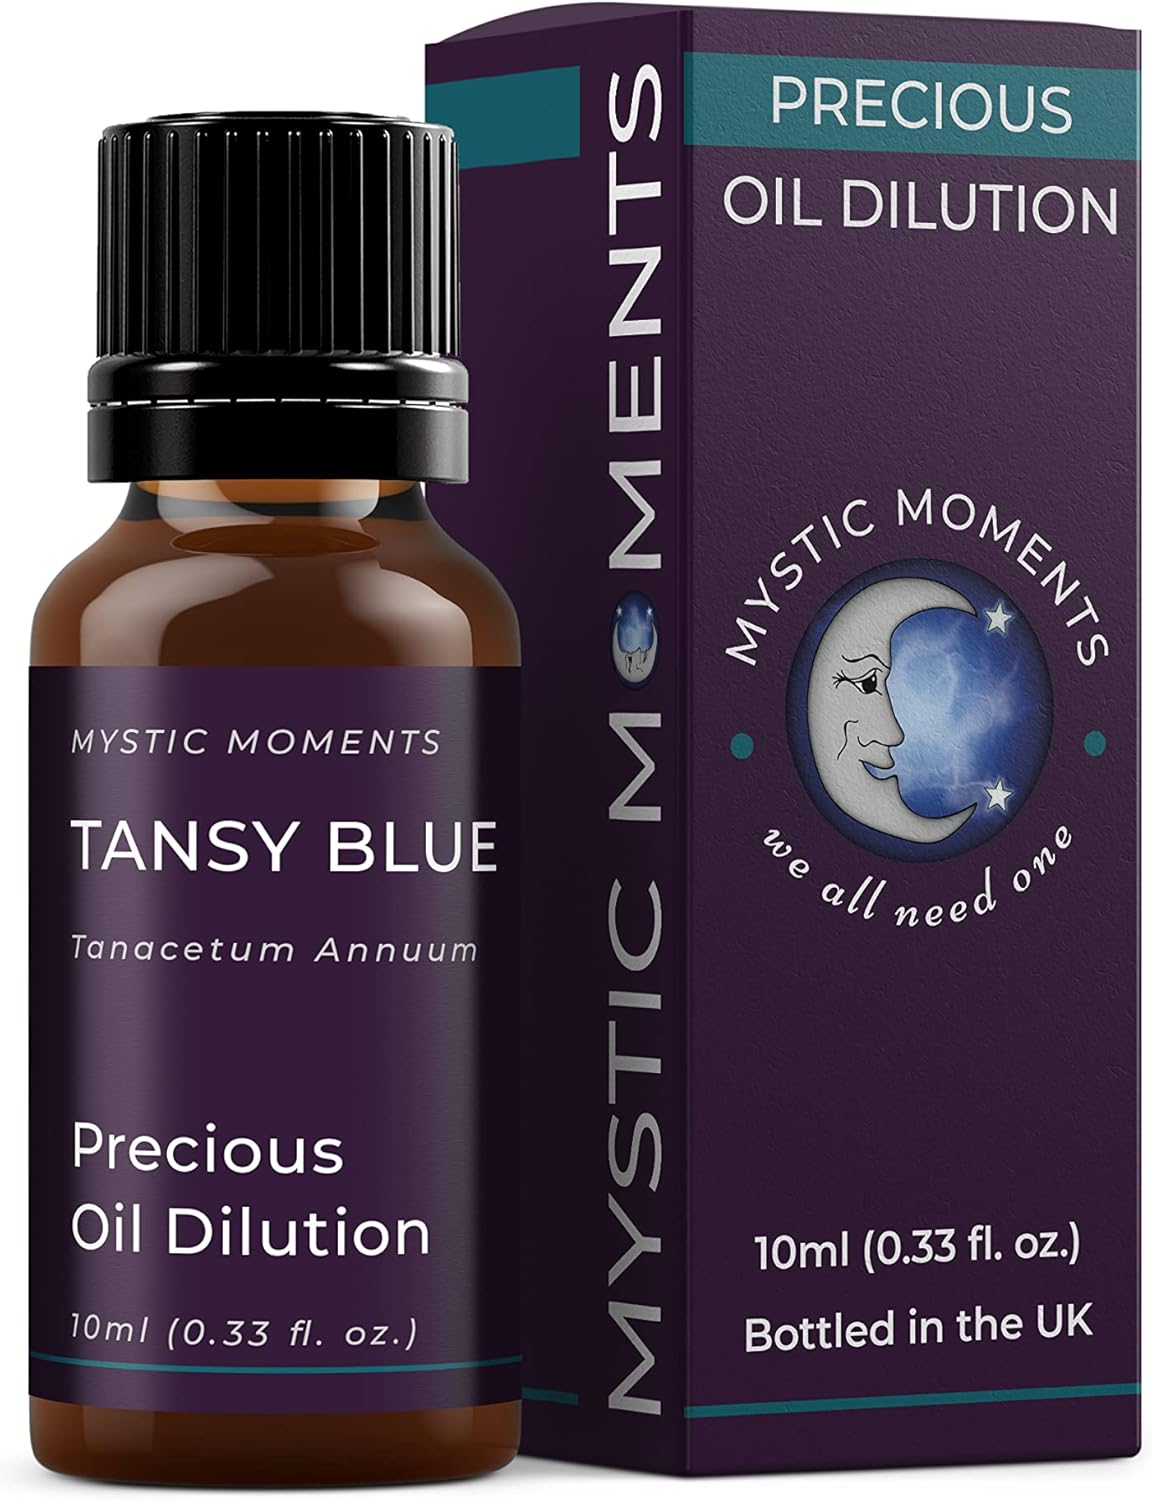 Mystic Moments | Tansy Blue Precious Oil Dilution 10ml 3% Jojoba Blend Perfect for Massage, Skincare, Beauty and Aromatherapy